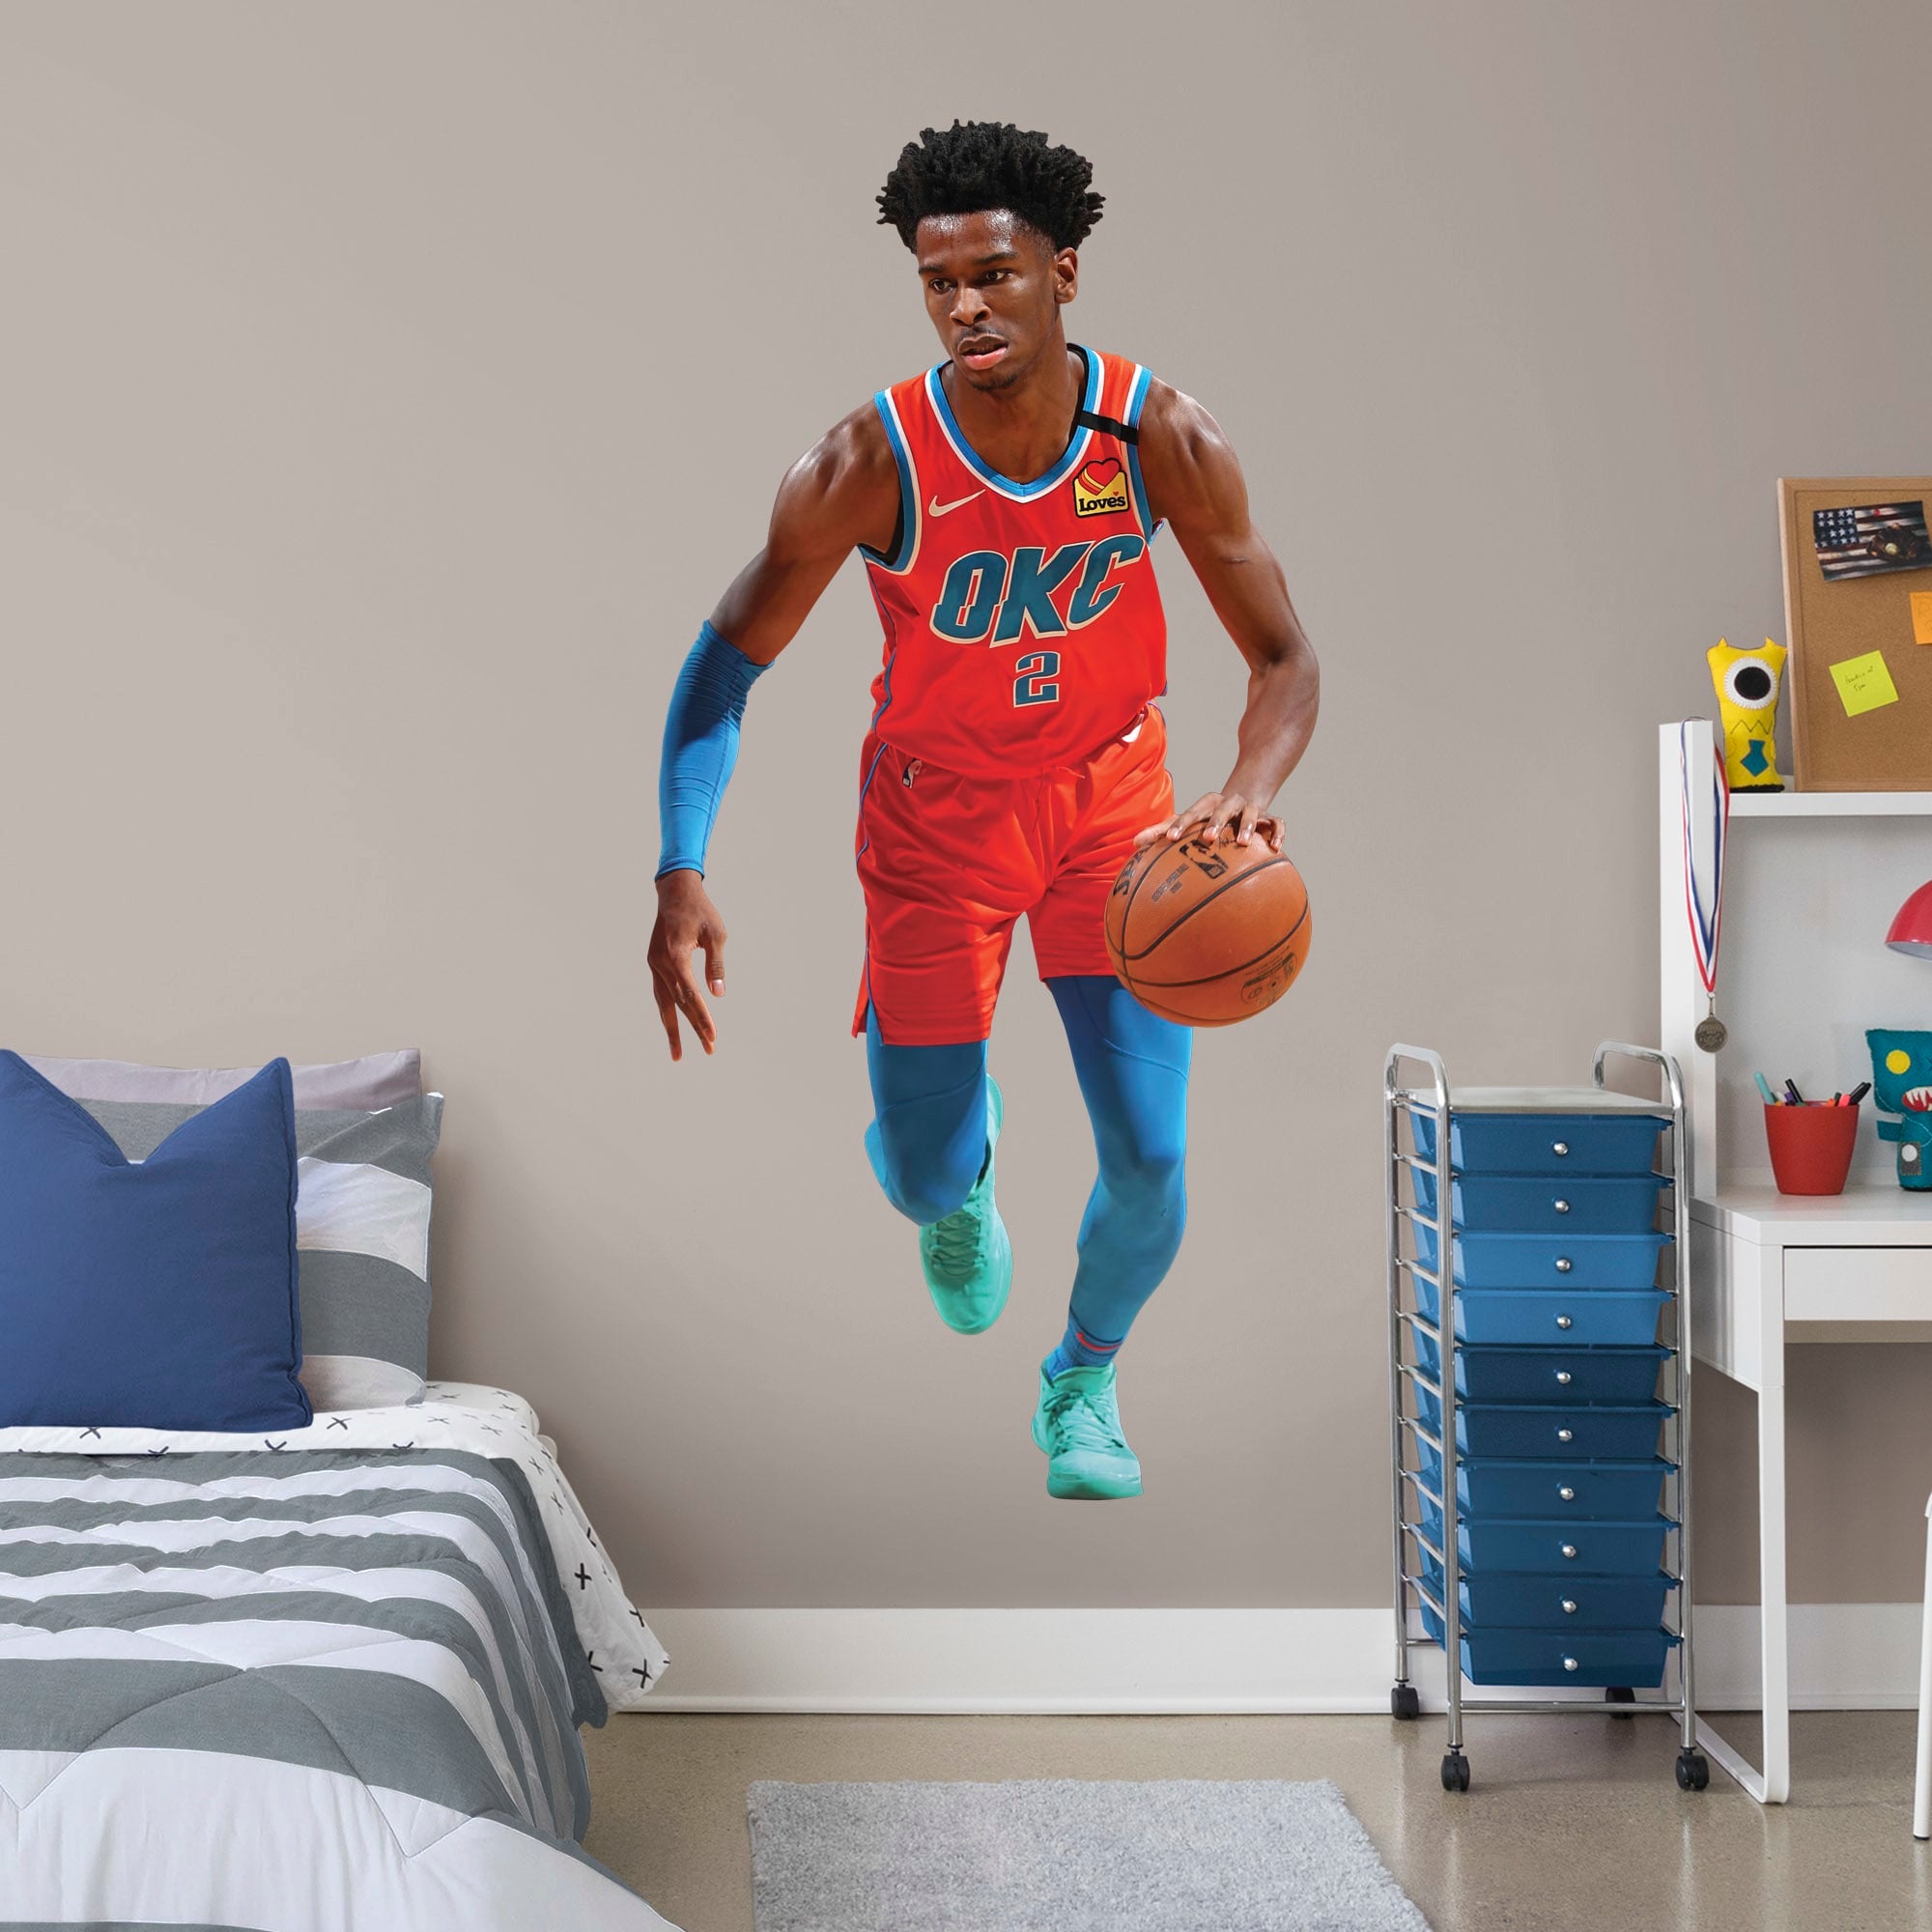 Shai Gilgeous-Alexander for Oklahoma City Thunder - Officially Licensed NBA Removable Wall Decal Life-Size Athlete + 2 Decals (3